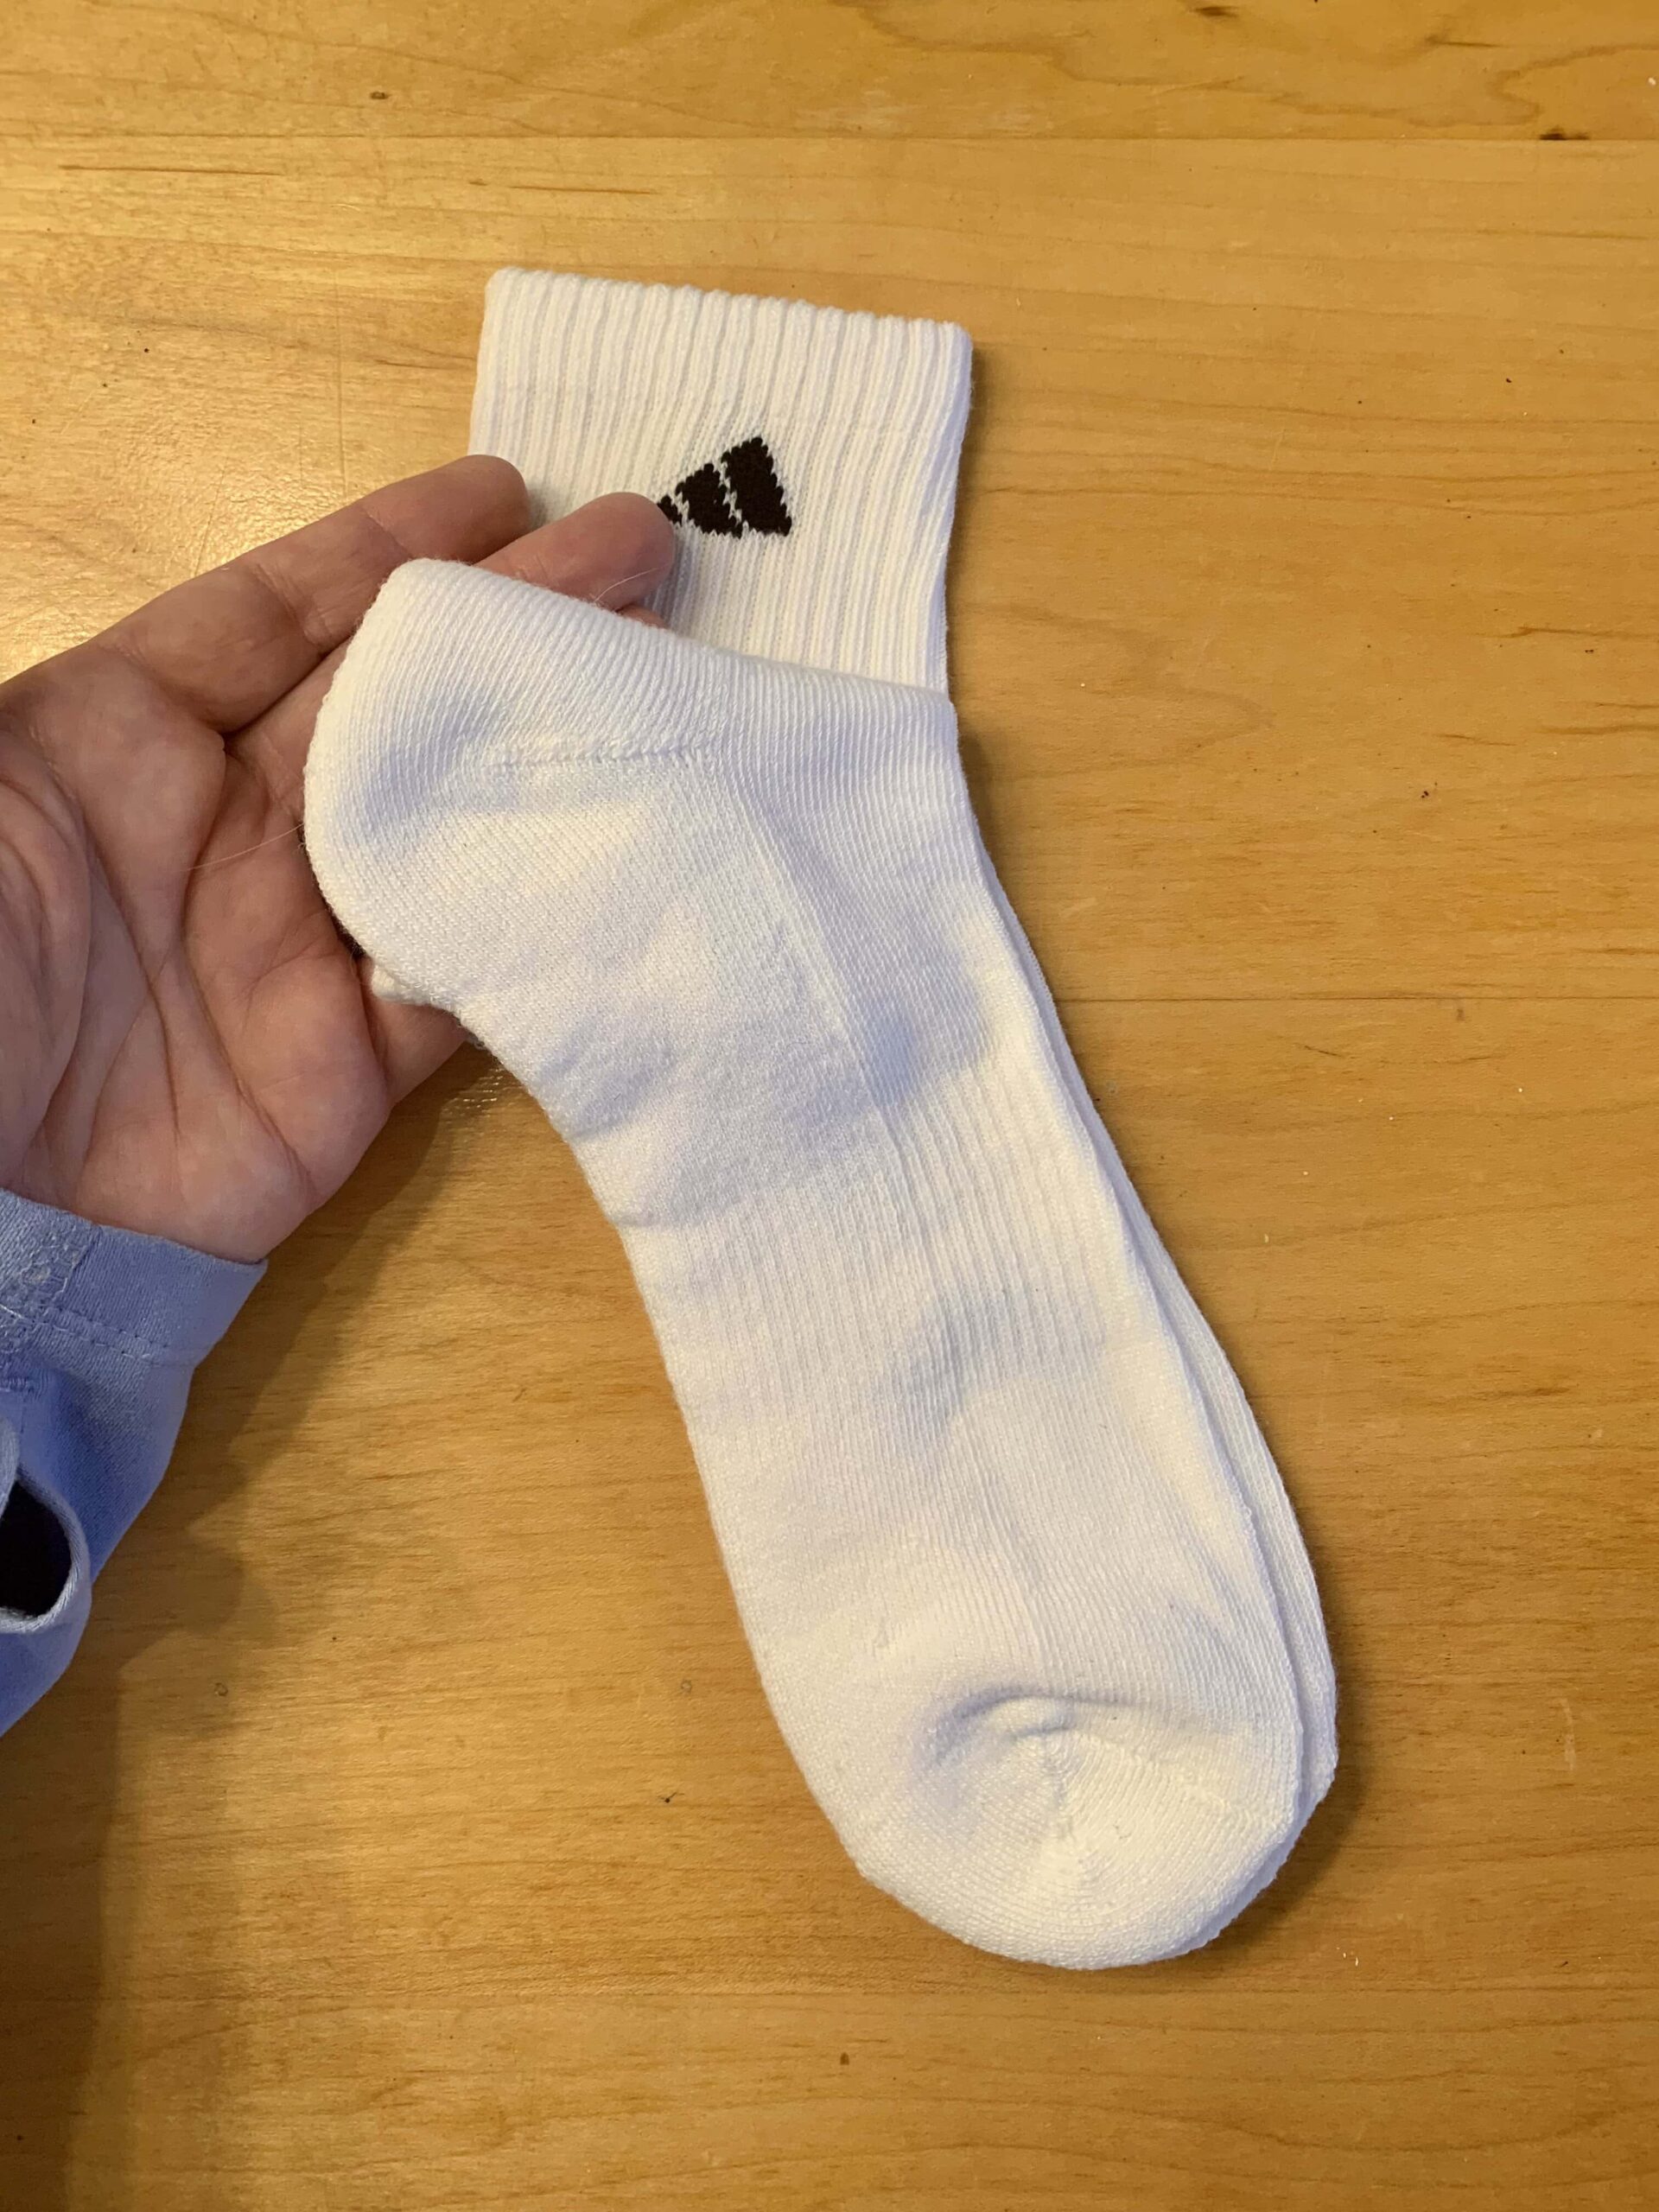 How to fold socks the tuck and roll method